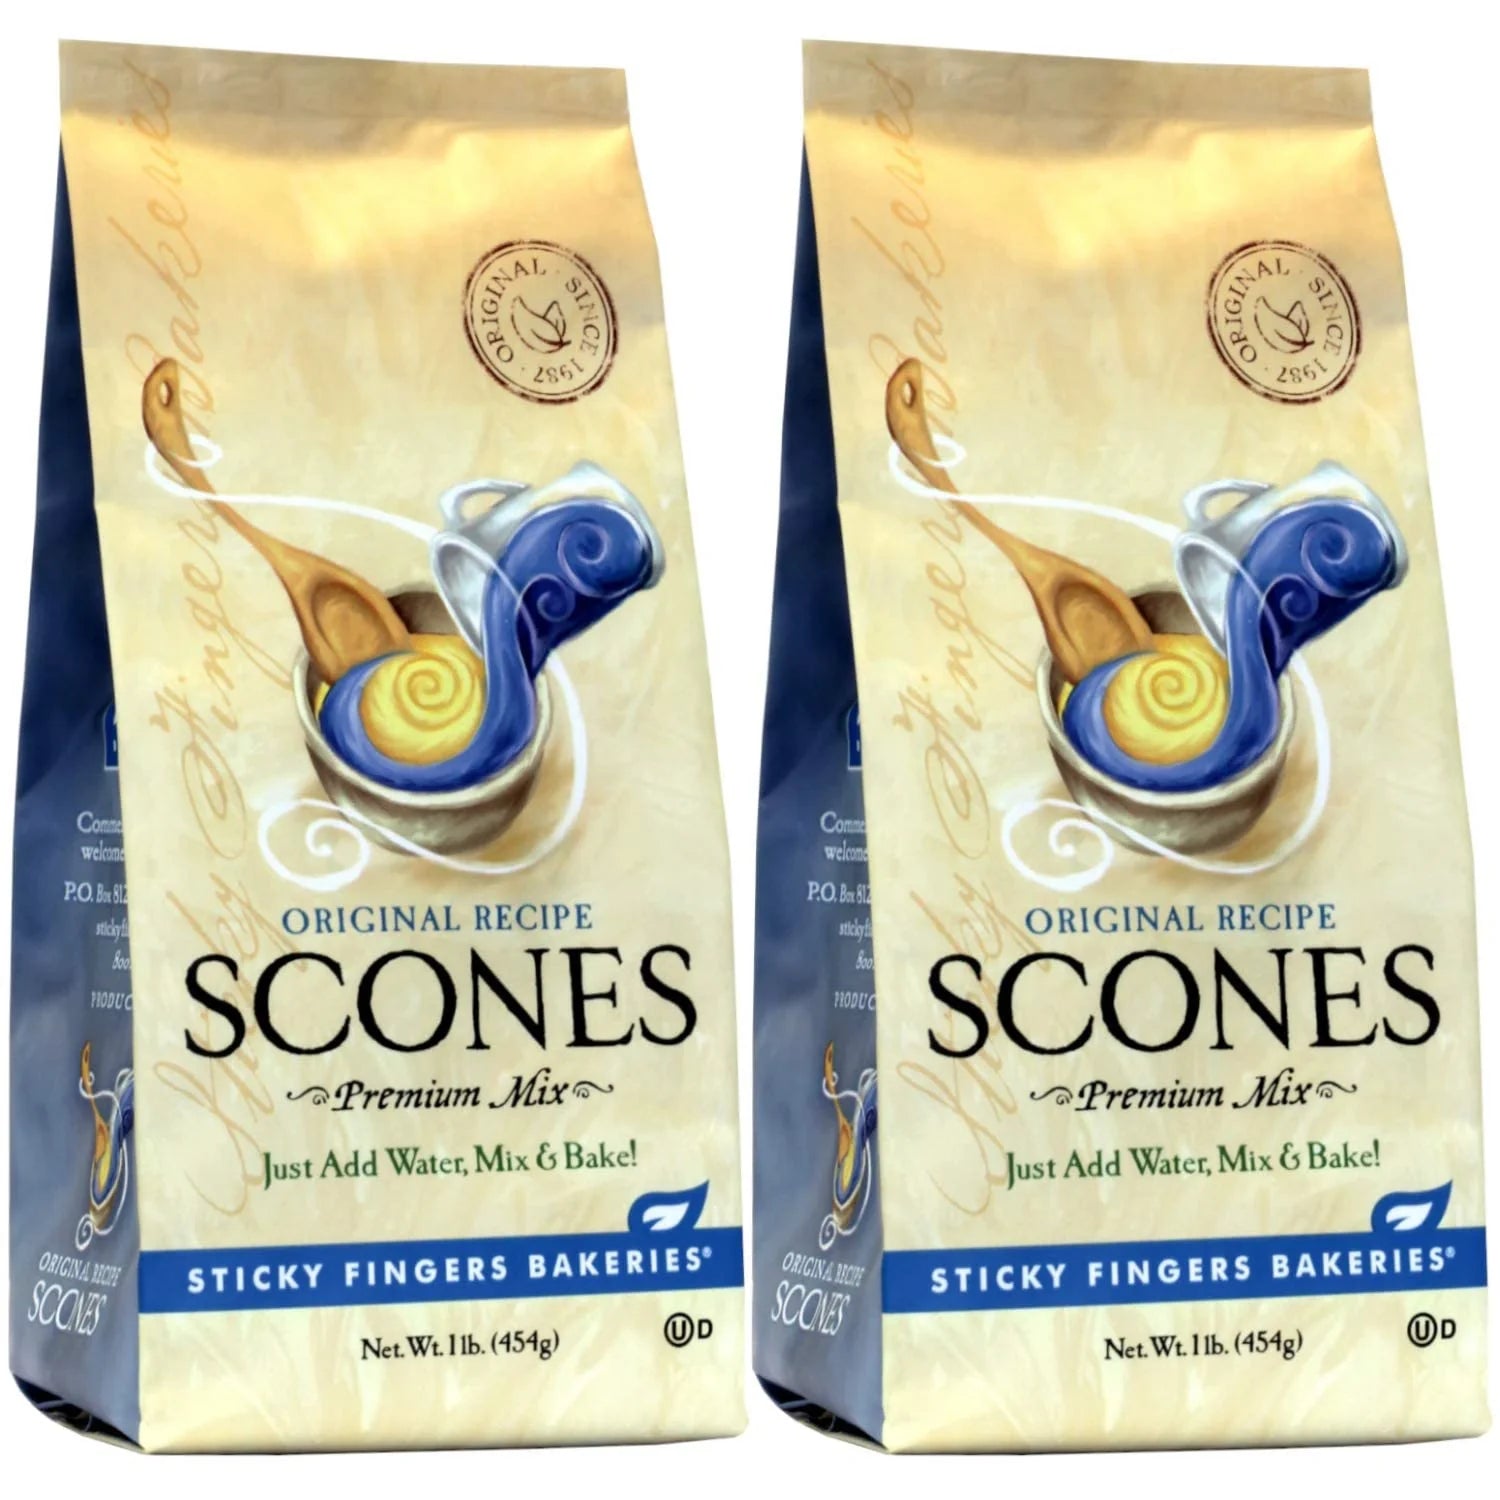 English Scone Mix, Original Flavor by Sticky Fingers Bakeries – Easy to Make English Scones Fresh Baked, Makes 12 Scones (2pk)